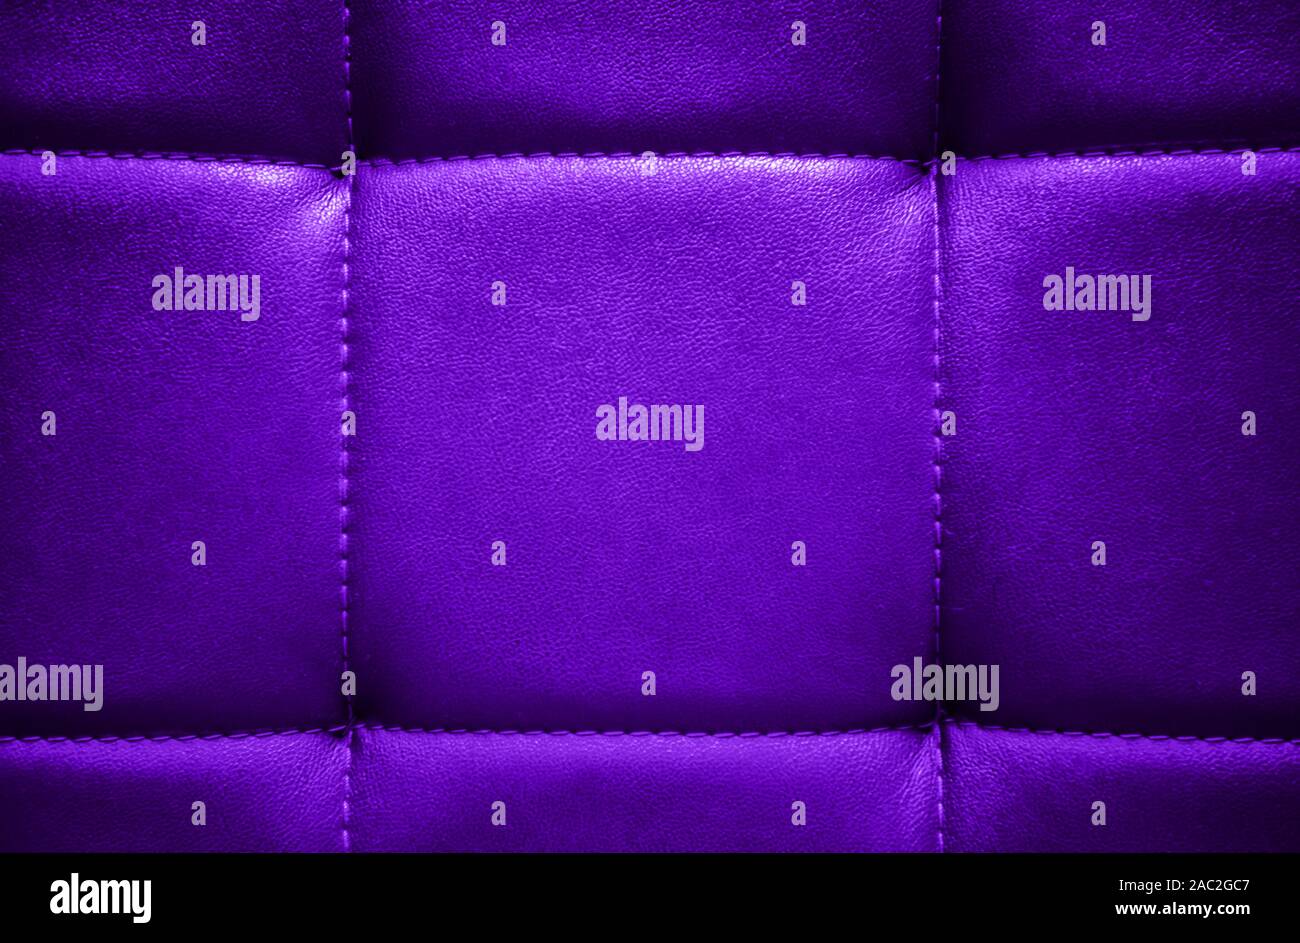 Shiny electric purple artificial textured leather stitched with thread. Close-up of sofa surface. View from directly above. Highly detailed background Stock Photo